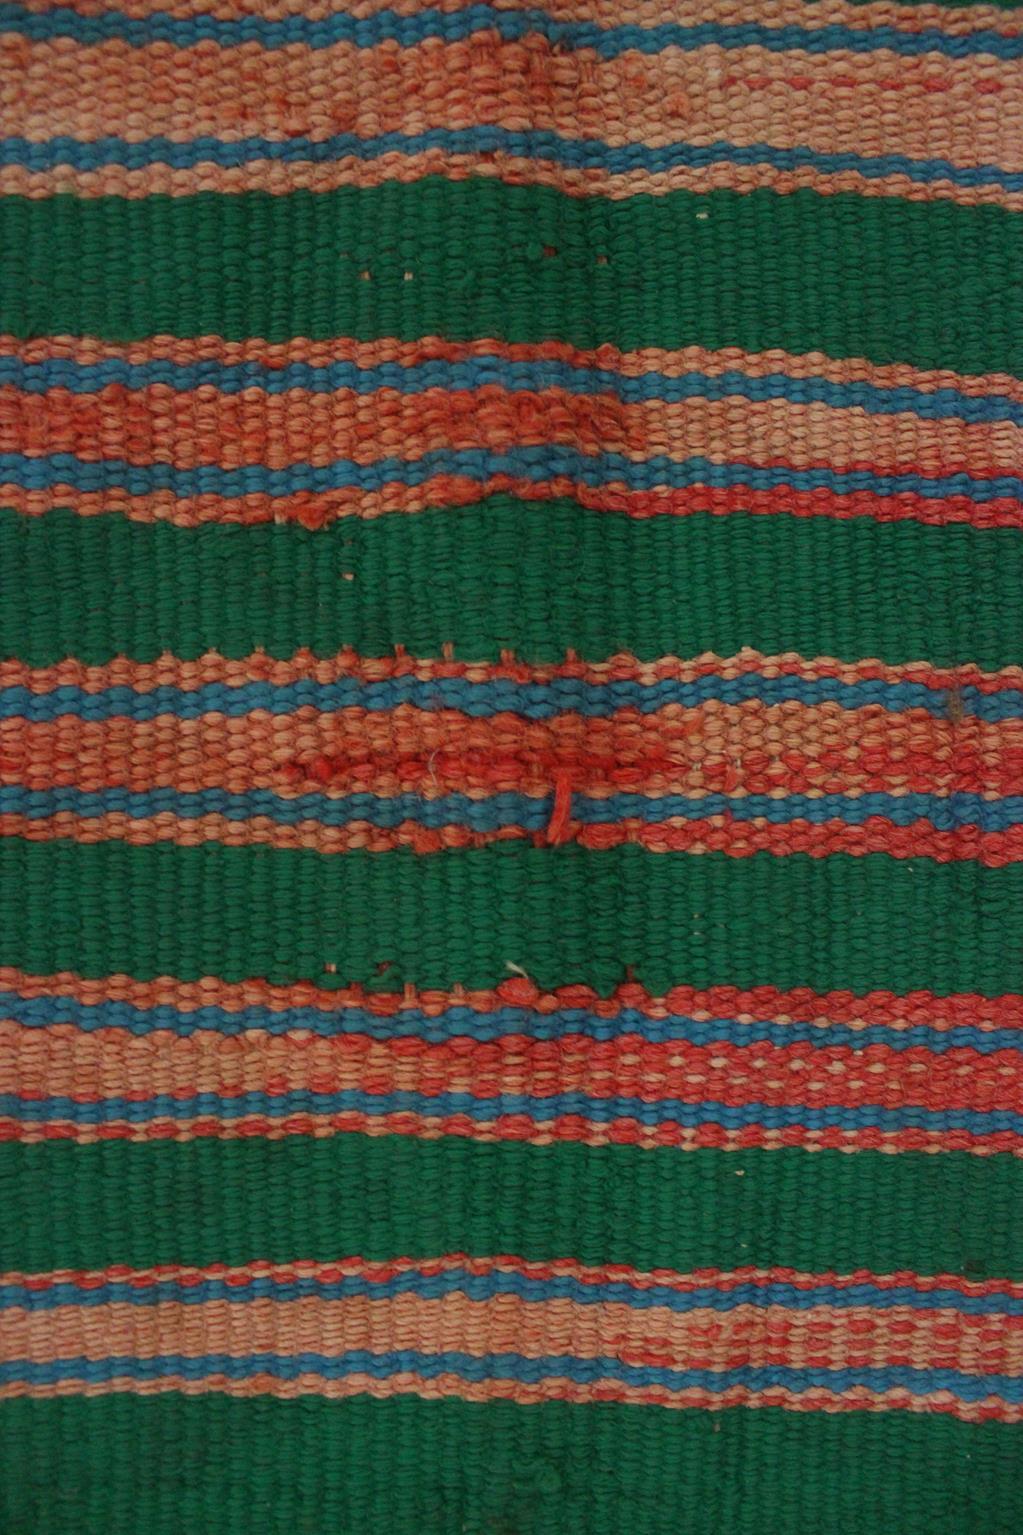 Vintage Moroccan striped kilim rug - Green/pink/red - 5.1x10.2feet / 157x312cm For Sale 5